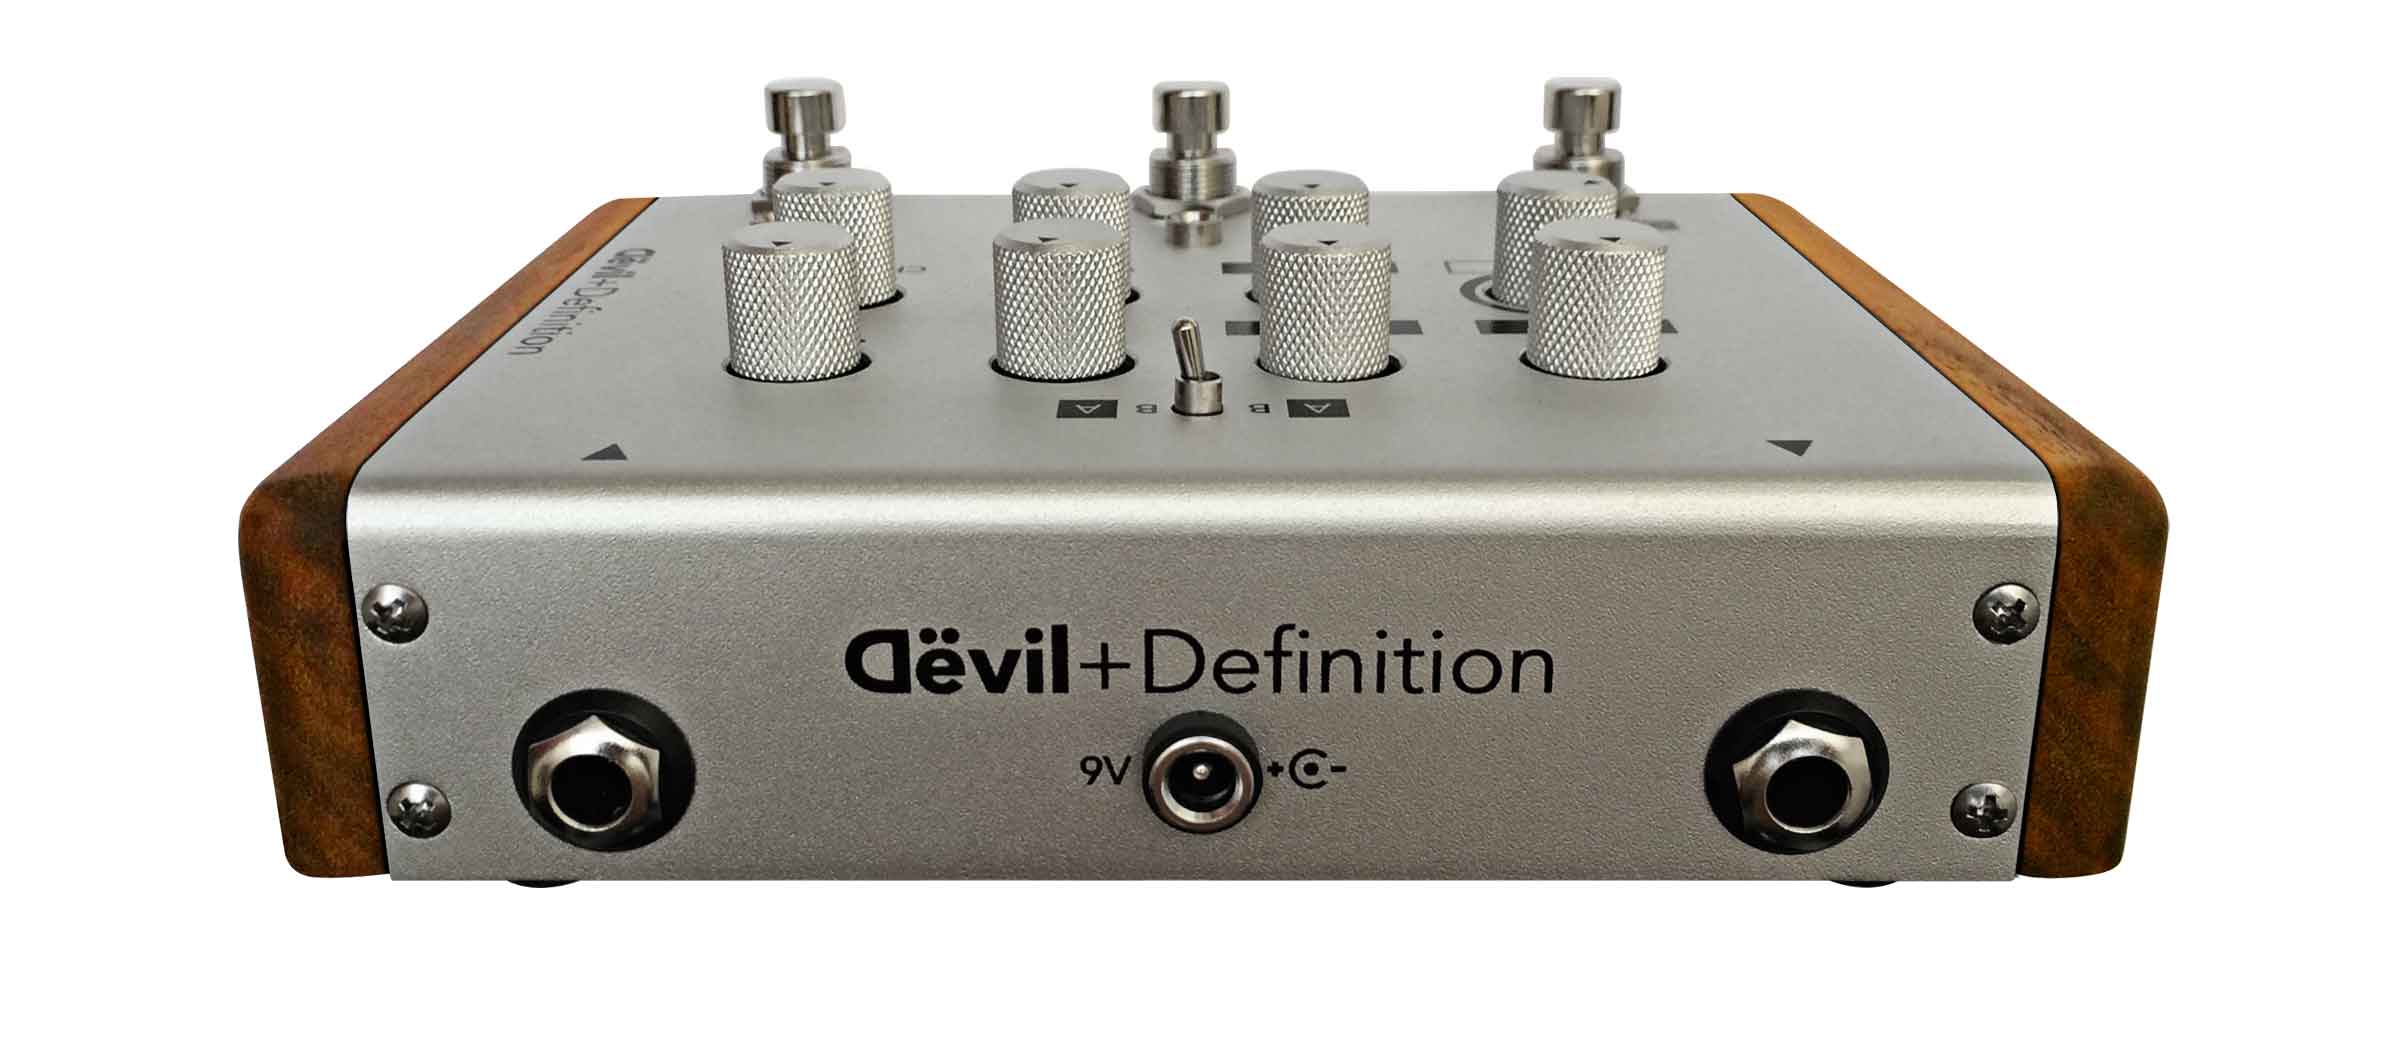 devil-and-definition-guitar-effect-pedal-christoph-gruber-adrian-belew-04